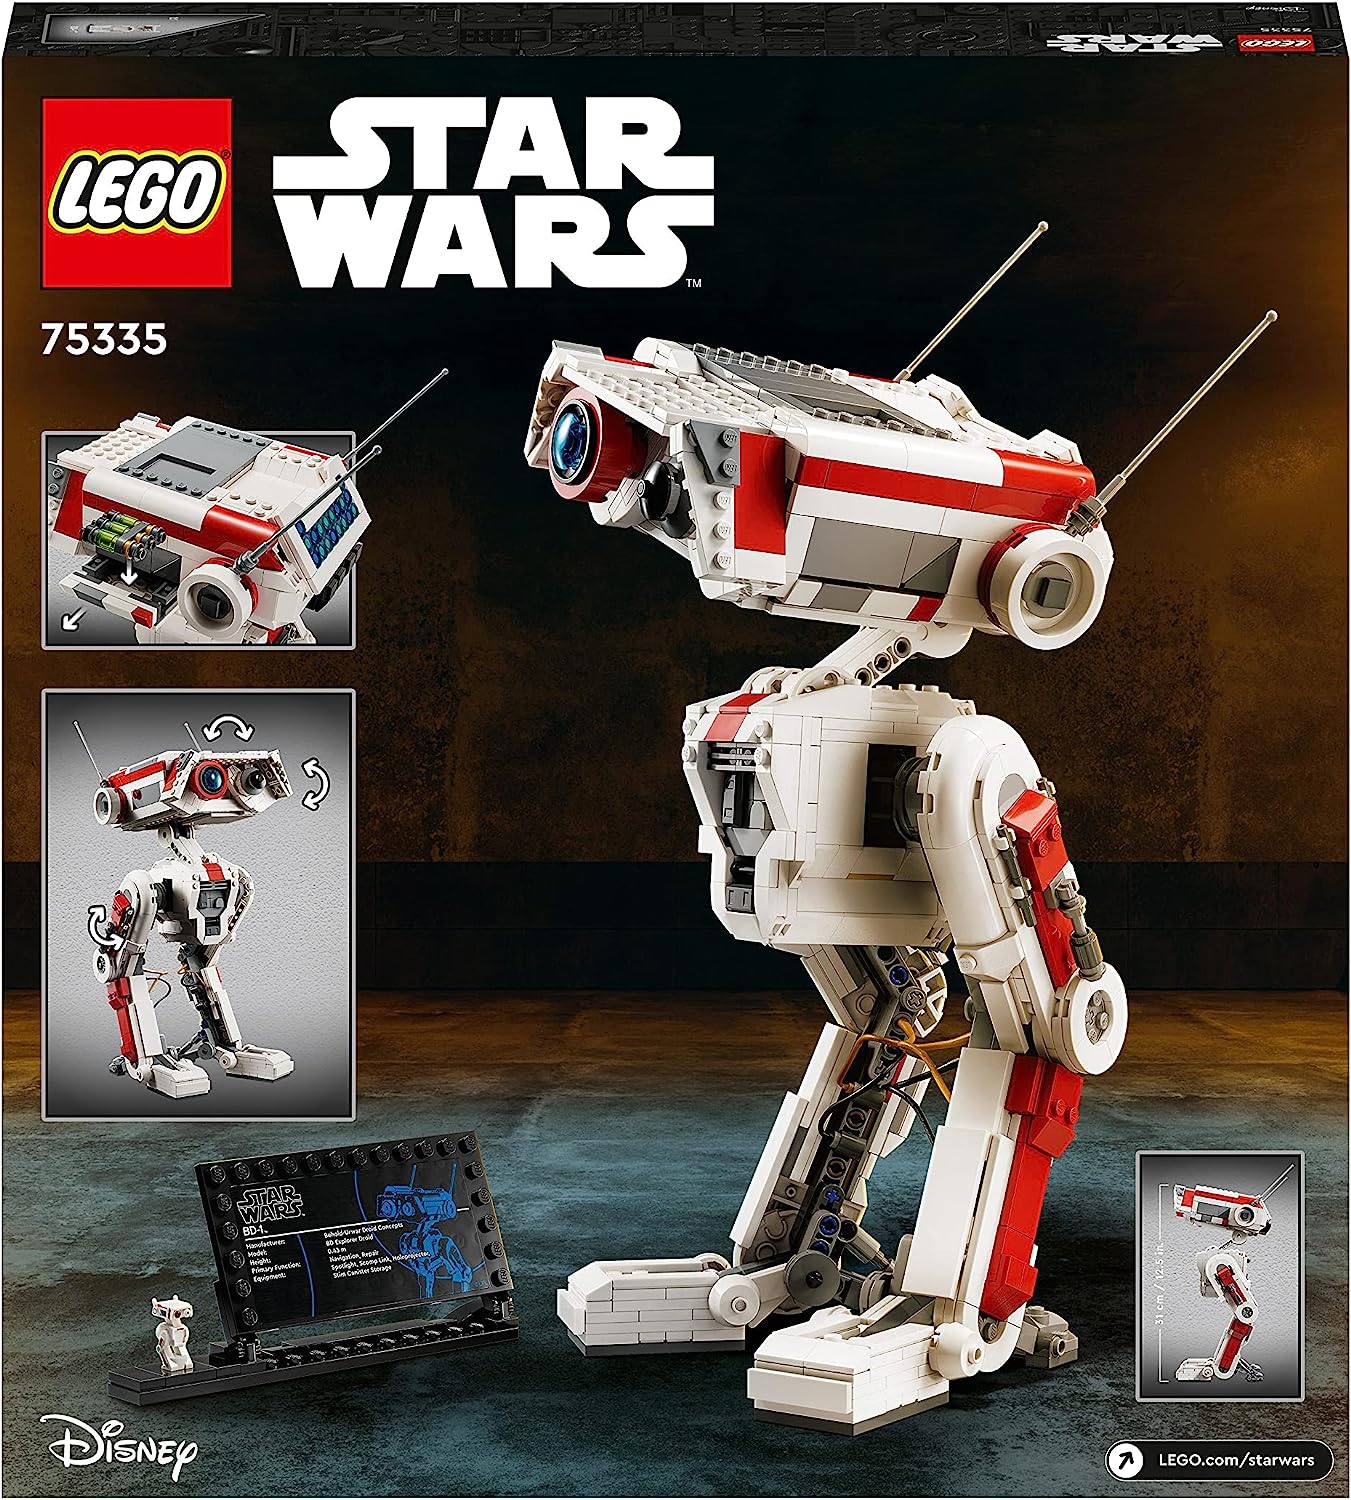 LEGO 75335 Star Wars BD-1 Model Kit, Movable Droid Figure, Room Decoration, Christmas Gift Idea for Boys & Girls, Teenagers from the Video Game Jedi: Fallen Order